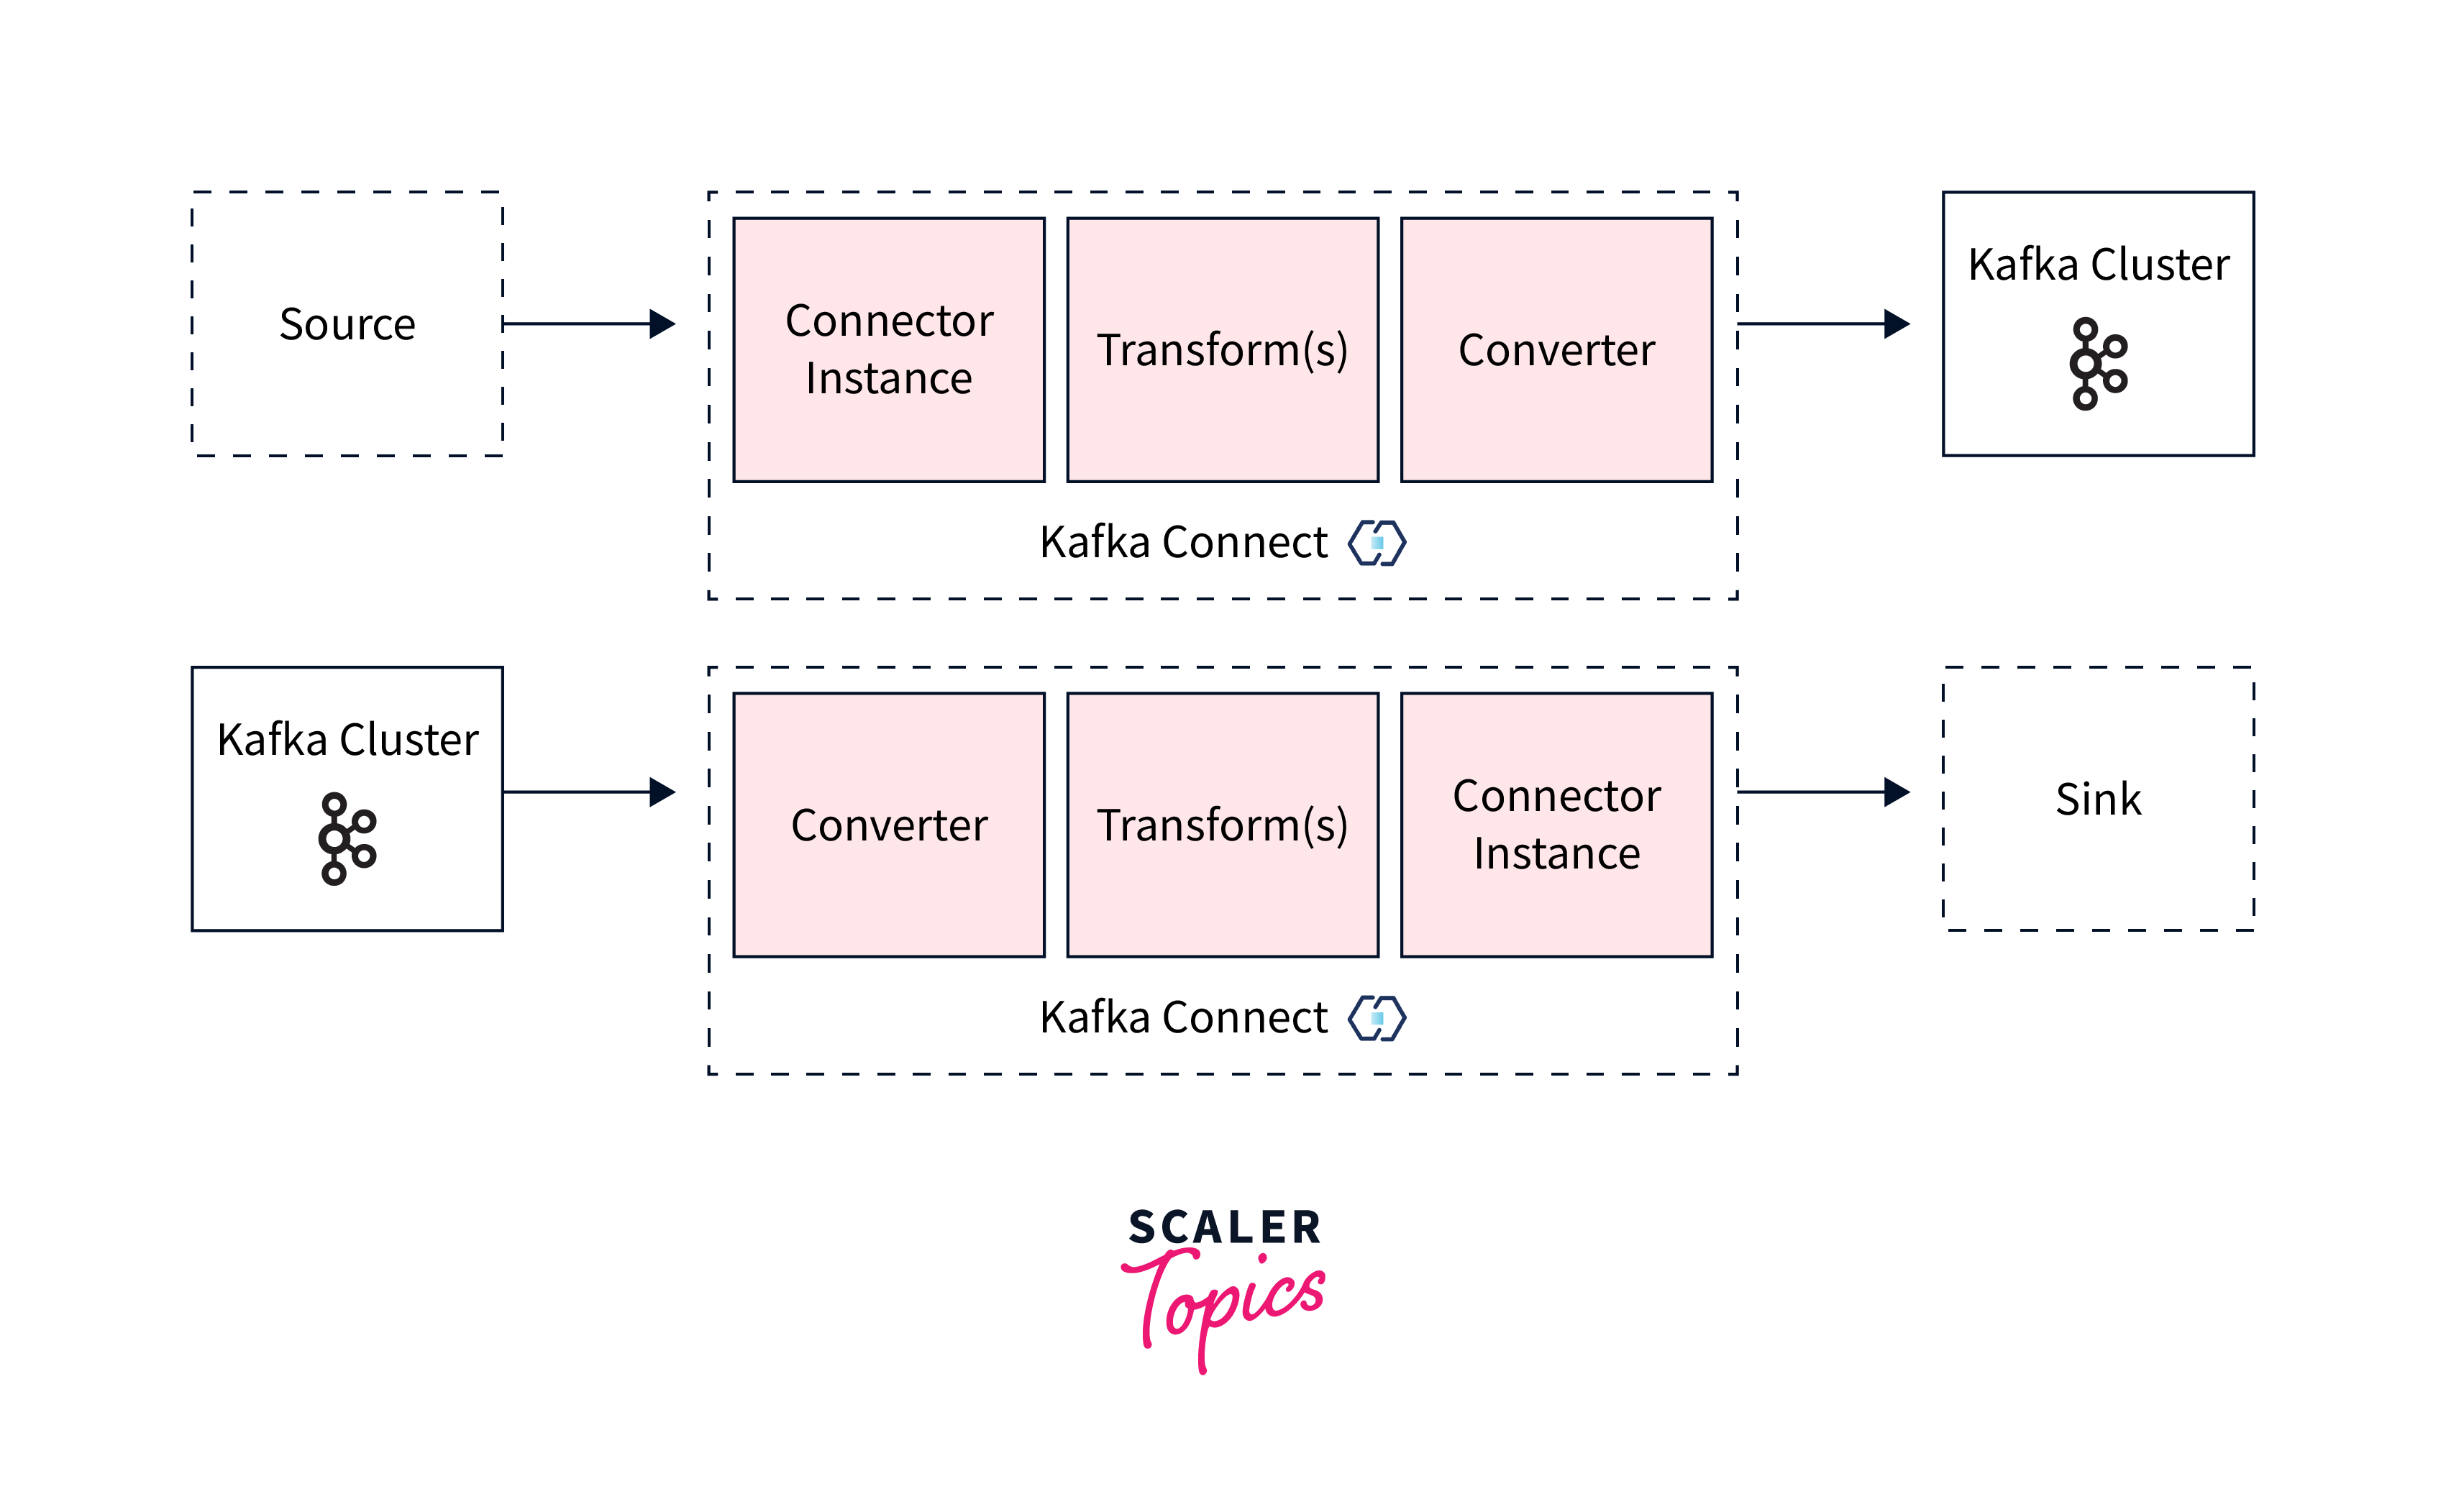 architectures of kafka connect